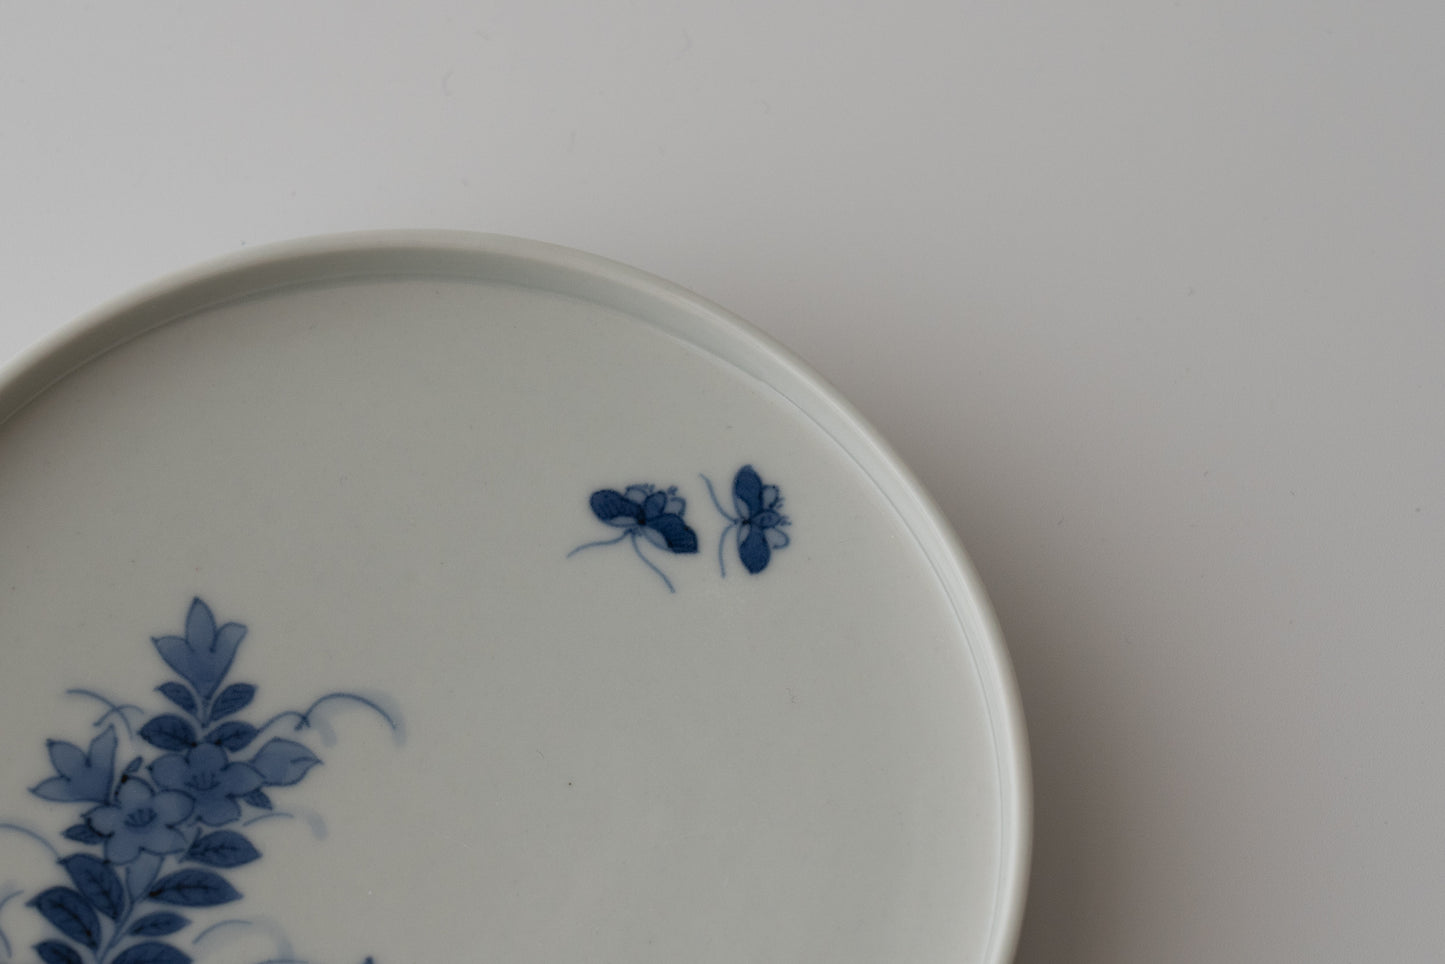 Dish with chinese bellflower and butterfly design, Imari ware in Kakiemon style